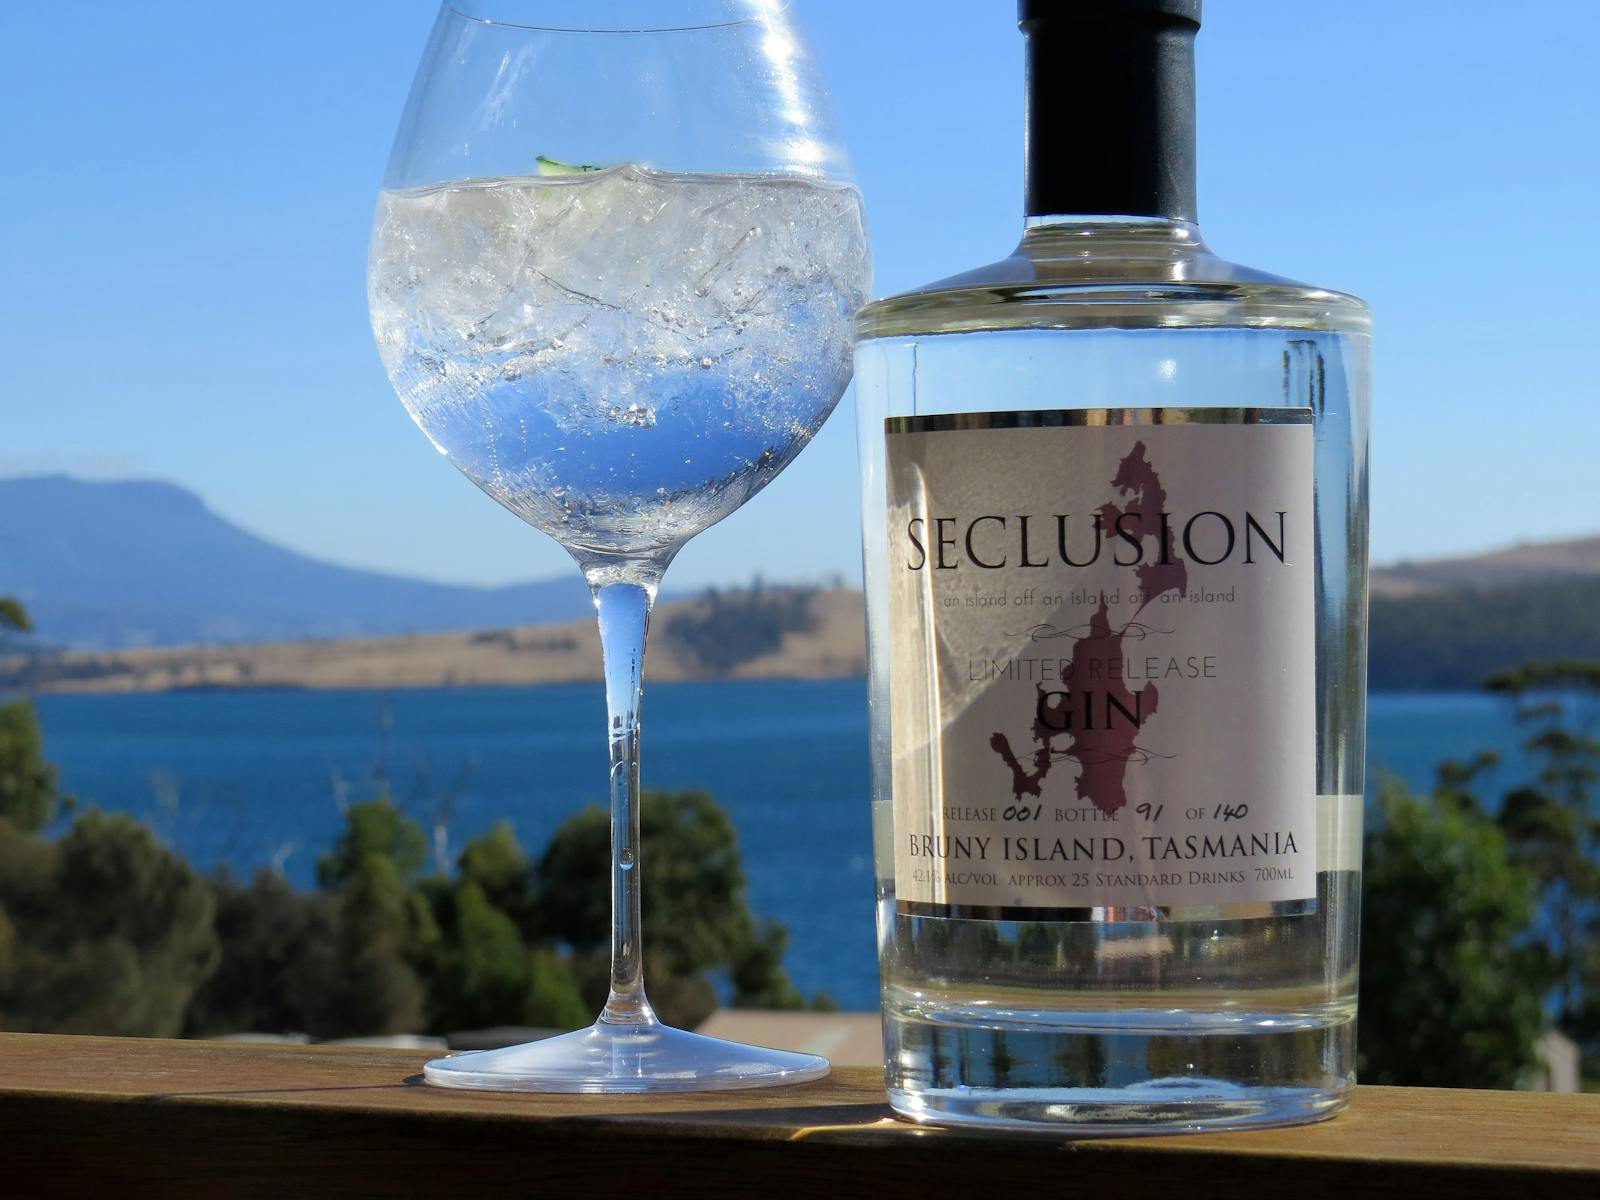 Seclusion Gin